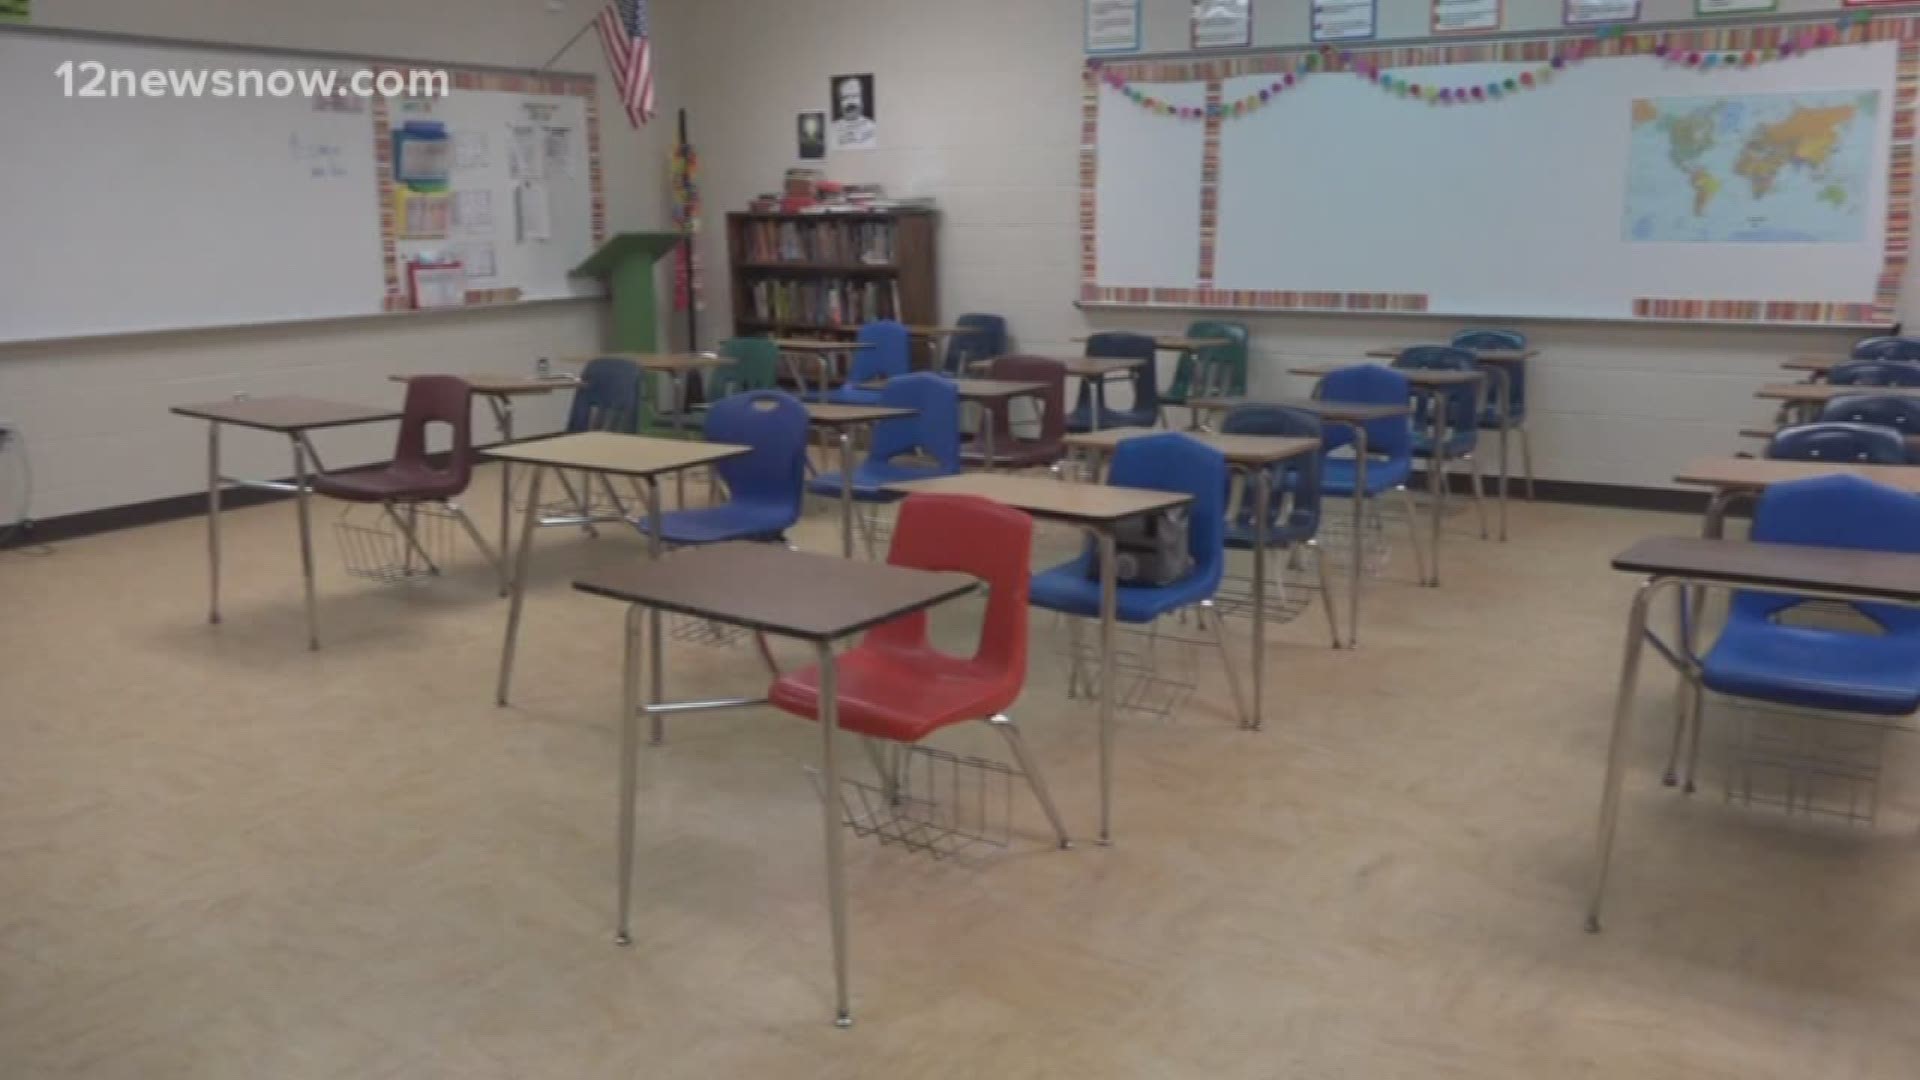 The Texas Education Agency now says schools will not be required to offer remote learning.